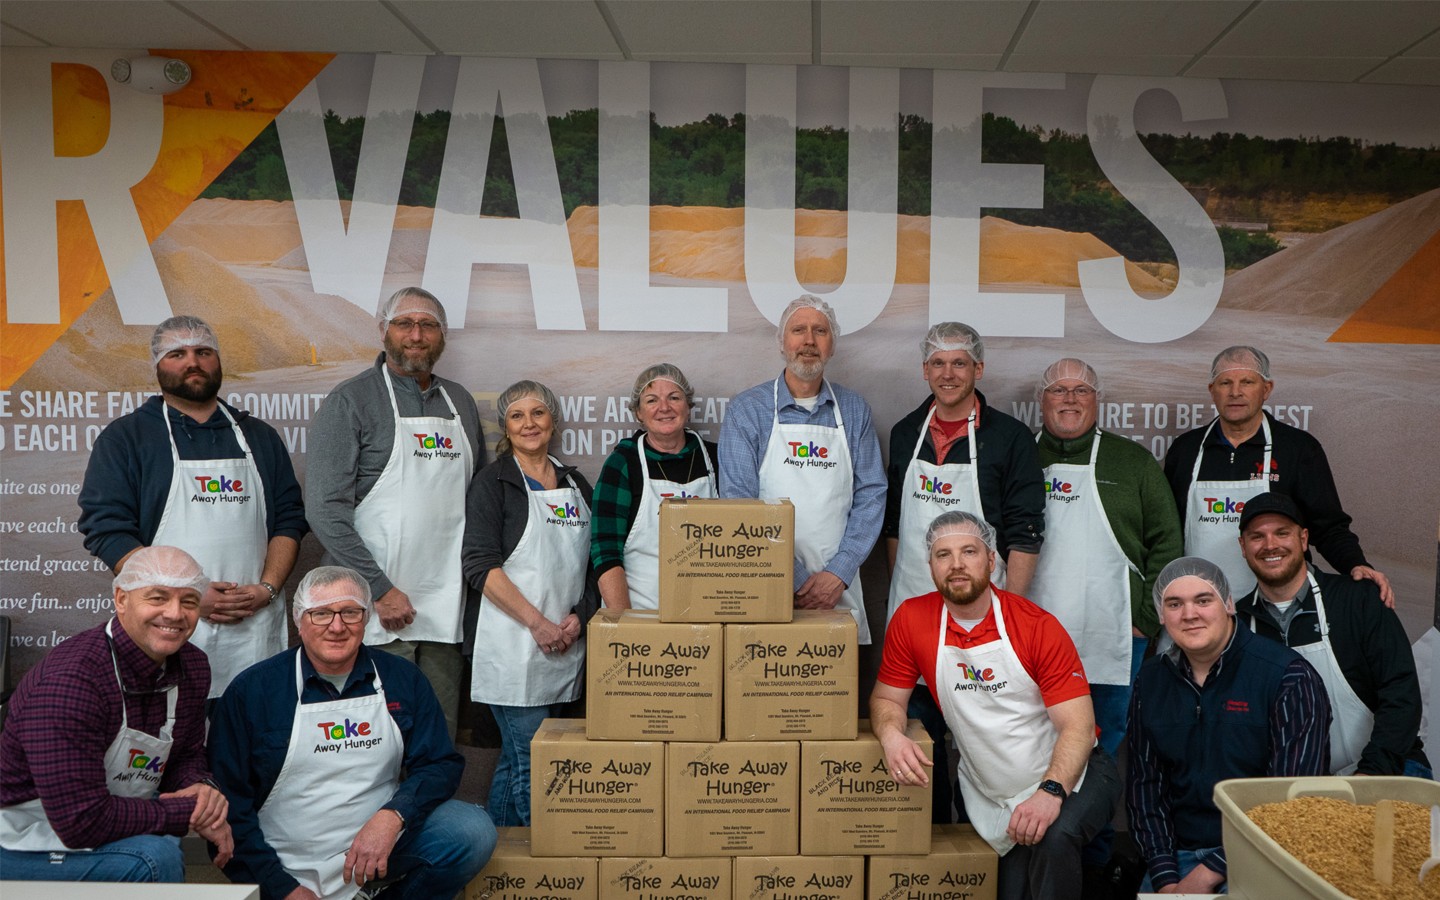 Team members packaged 5,400 meals over the course of the event.